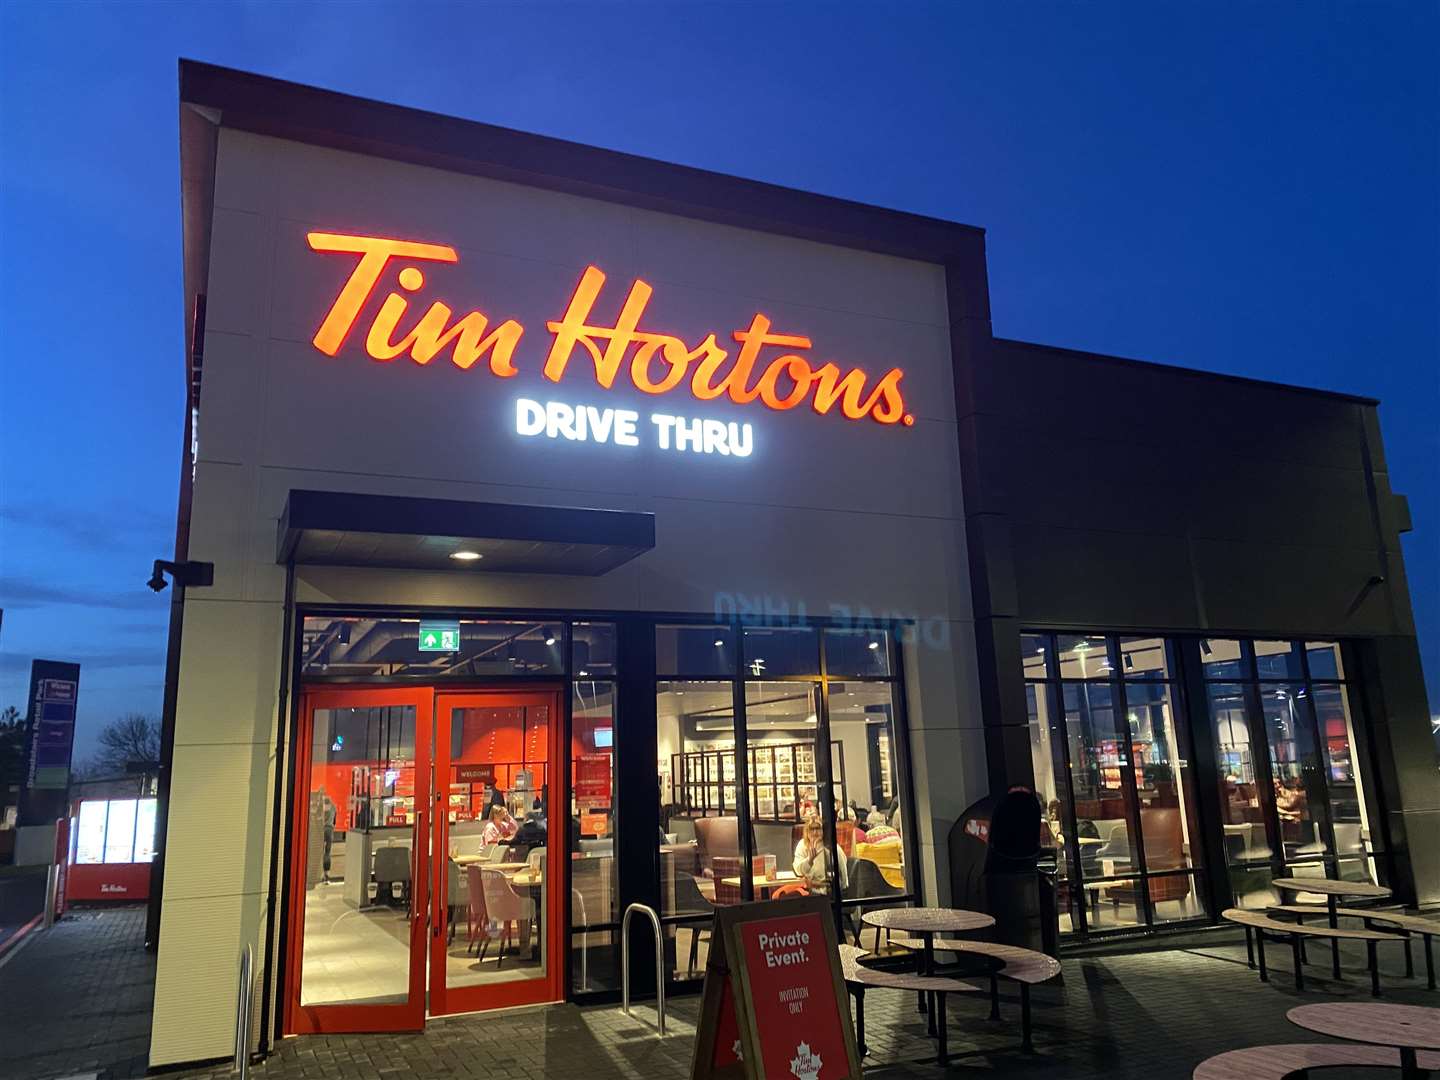 This is the second Tim Hortons branch in Kent, with the first opening in Gravesend in October last year